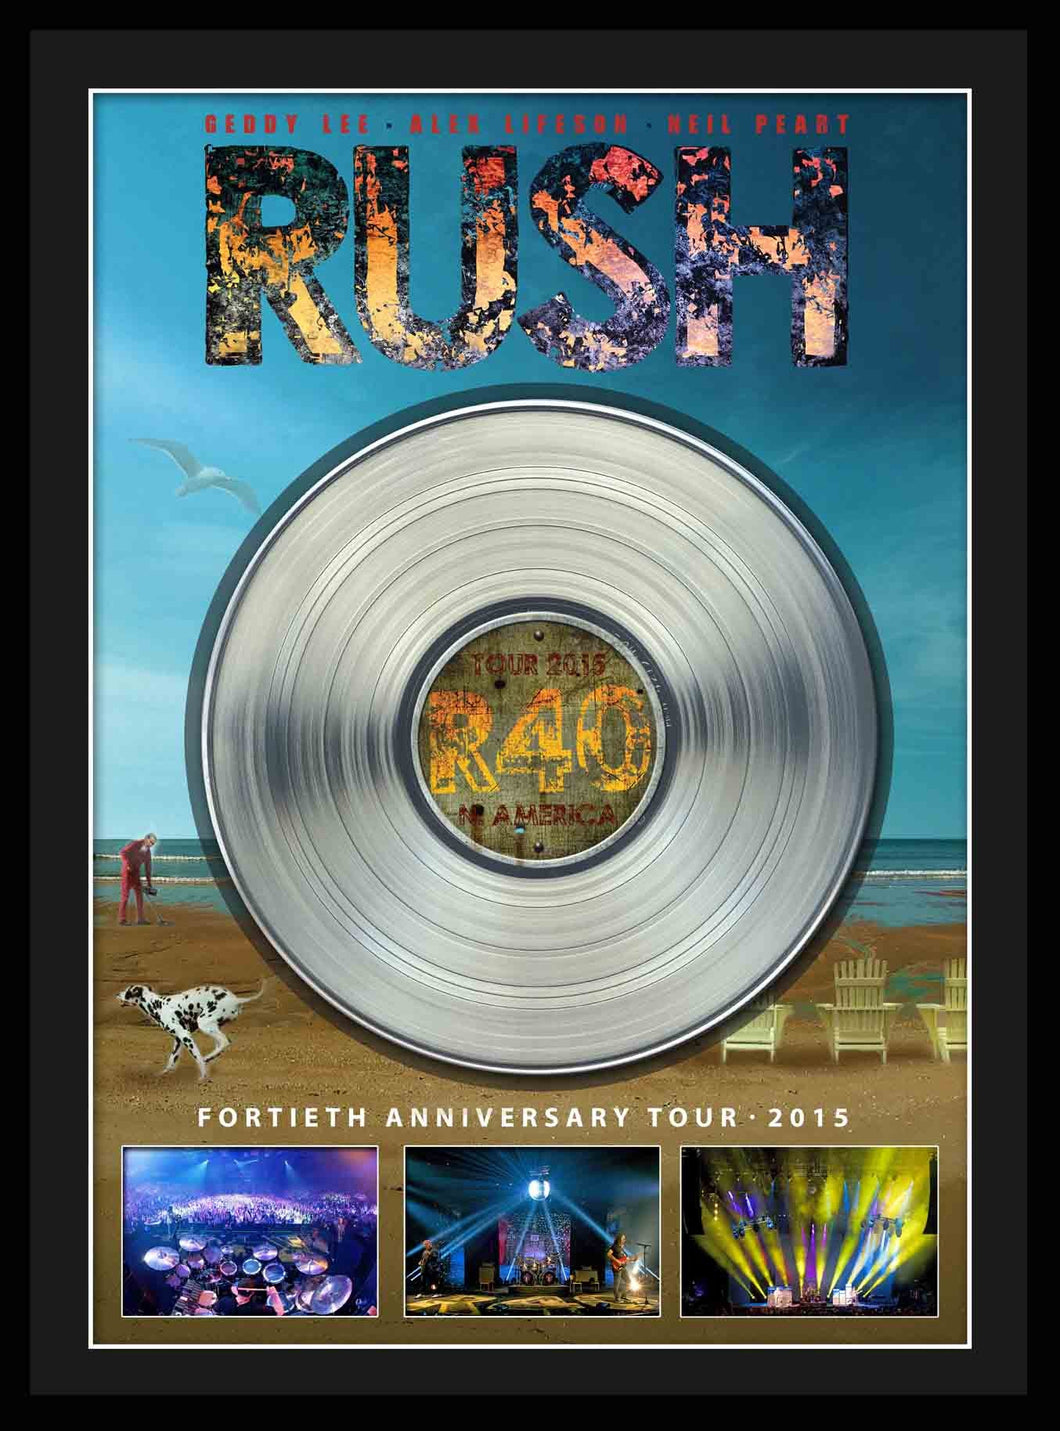 Rush Framed 40th Anniversary Tour with Platinum LP